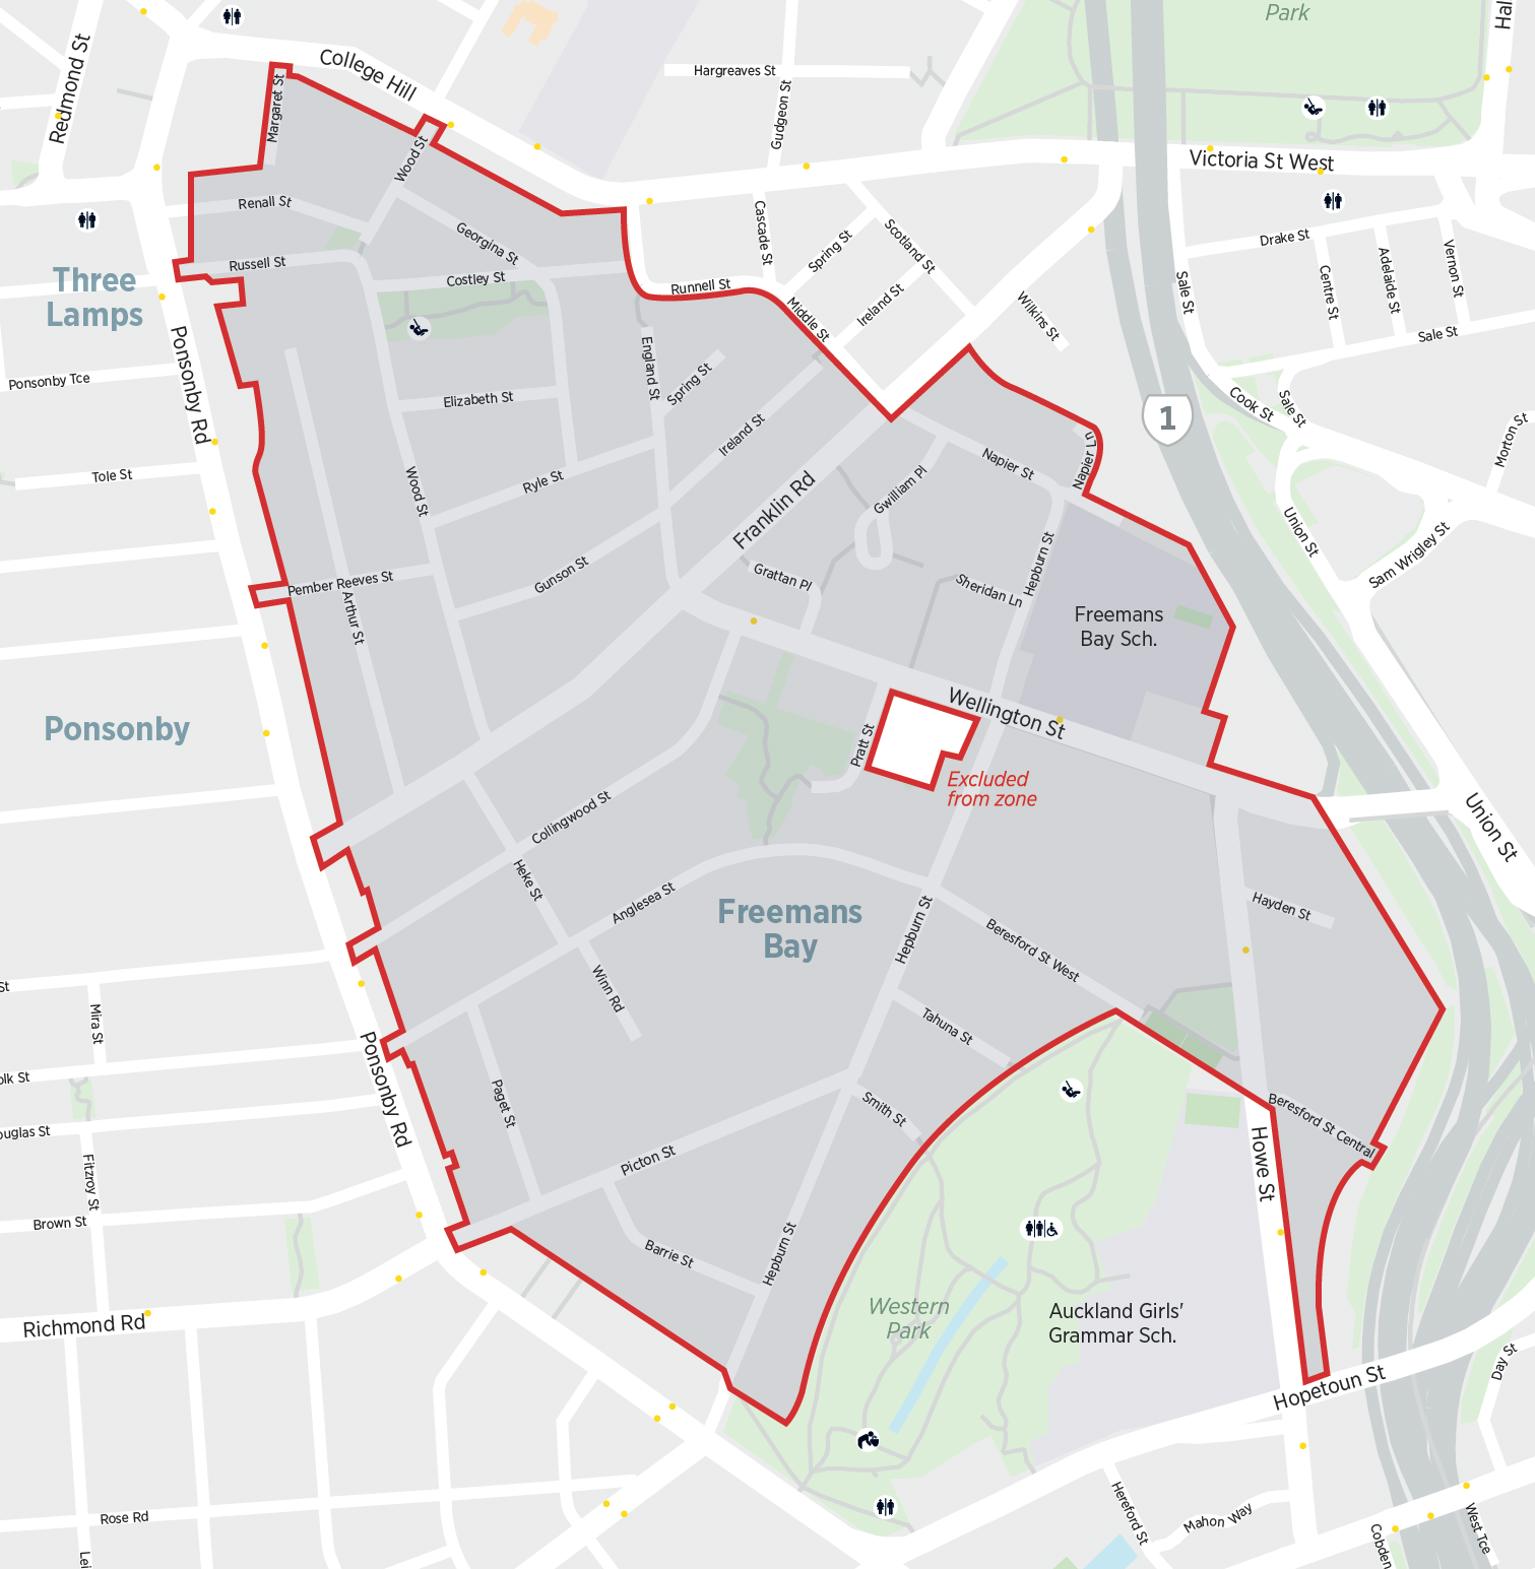 Map of Freemans Bay with the resident parking zone boundaries indicated with red lines.